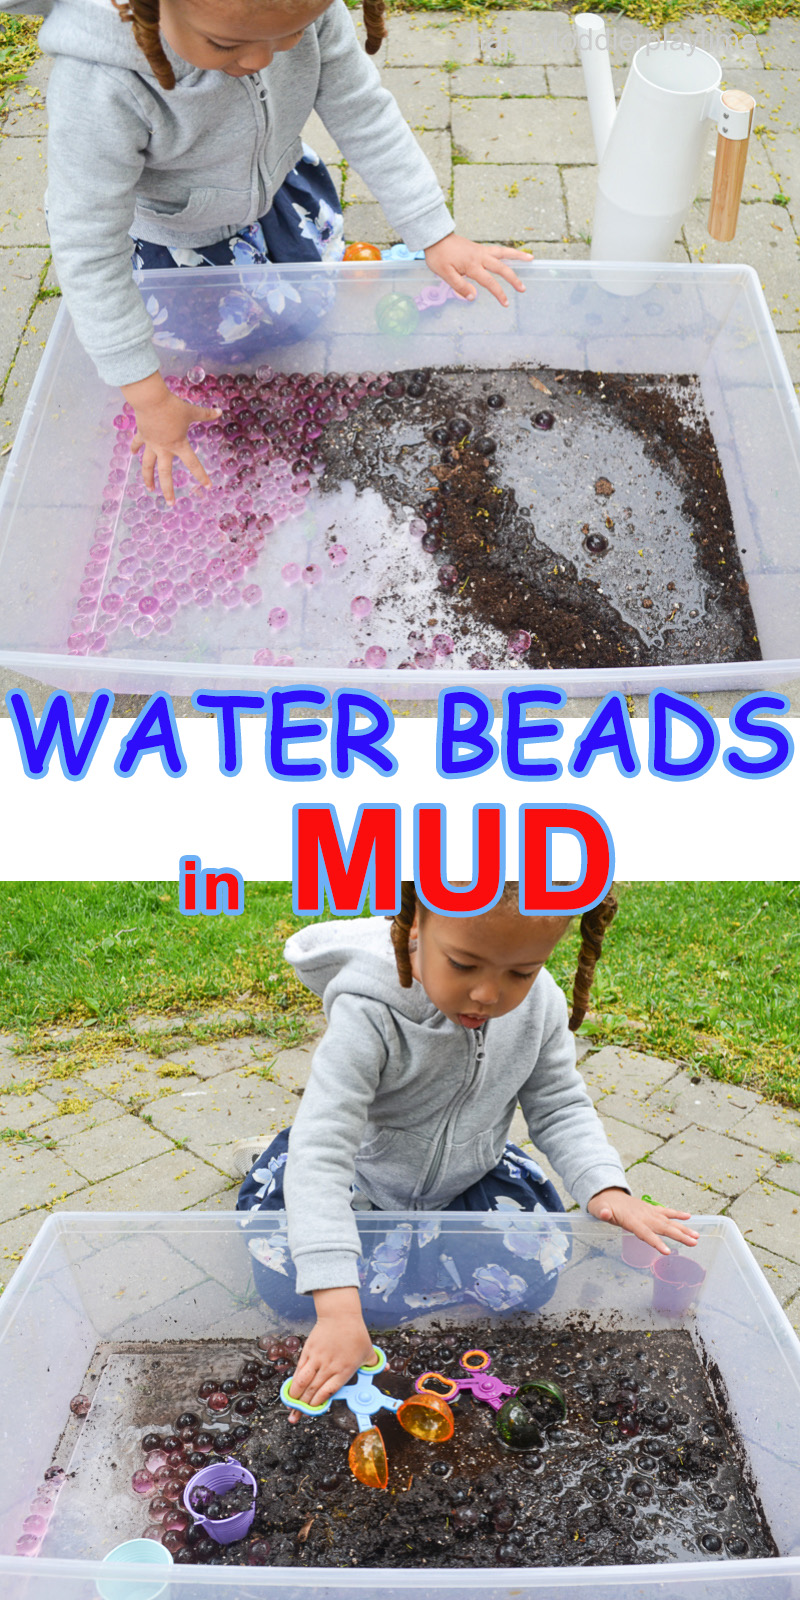 Water beads in mud sensory activity  for toddlers